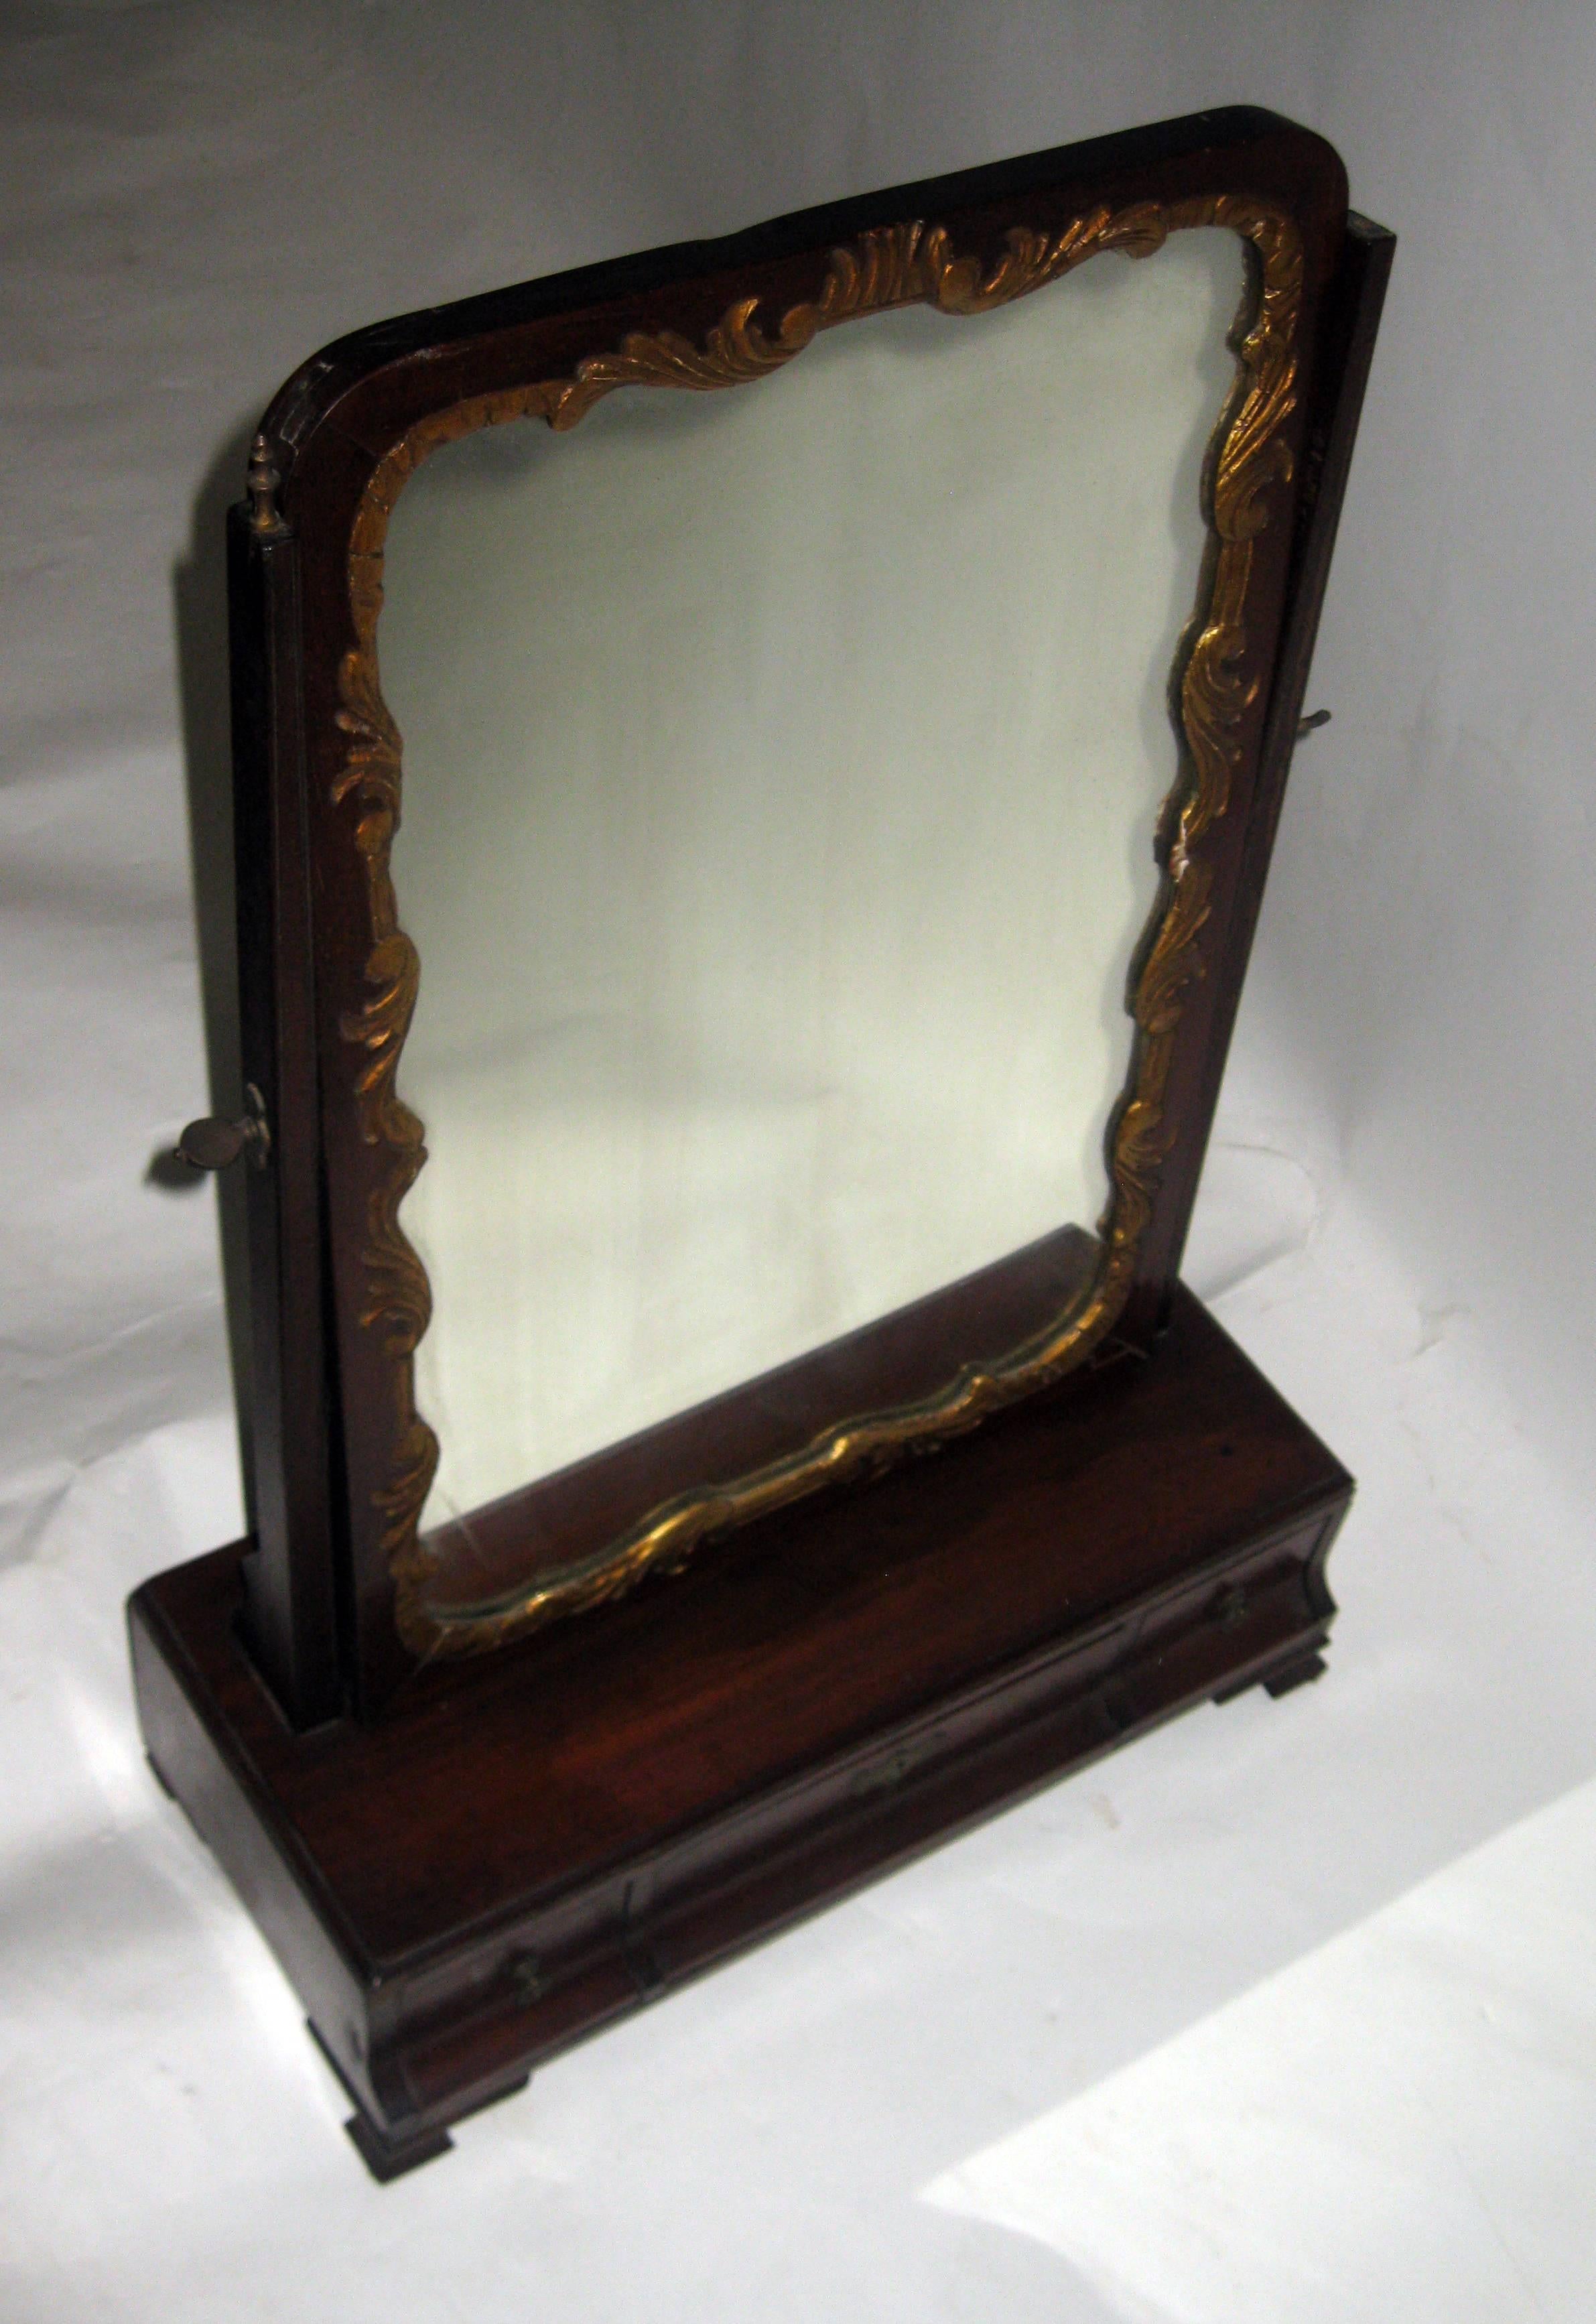 19th century Georgian mahogany dressing or shaving mirror featuring original brass hardware, three drawers and ogee bracket feet. A.fancifully carved giltwood frame surrounds the swivel mirror that has a wooden back. See measurements below.